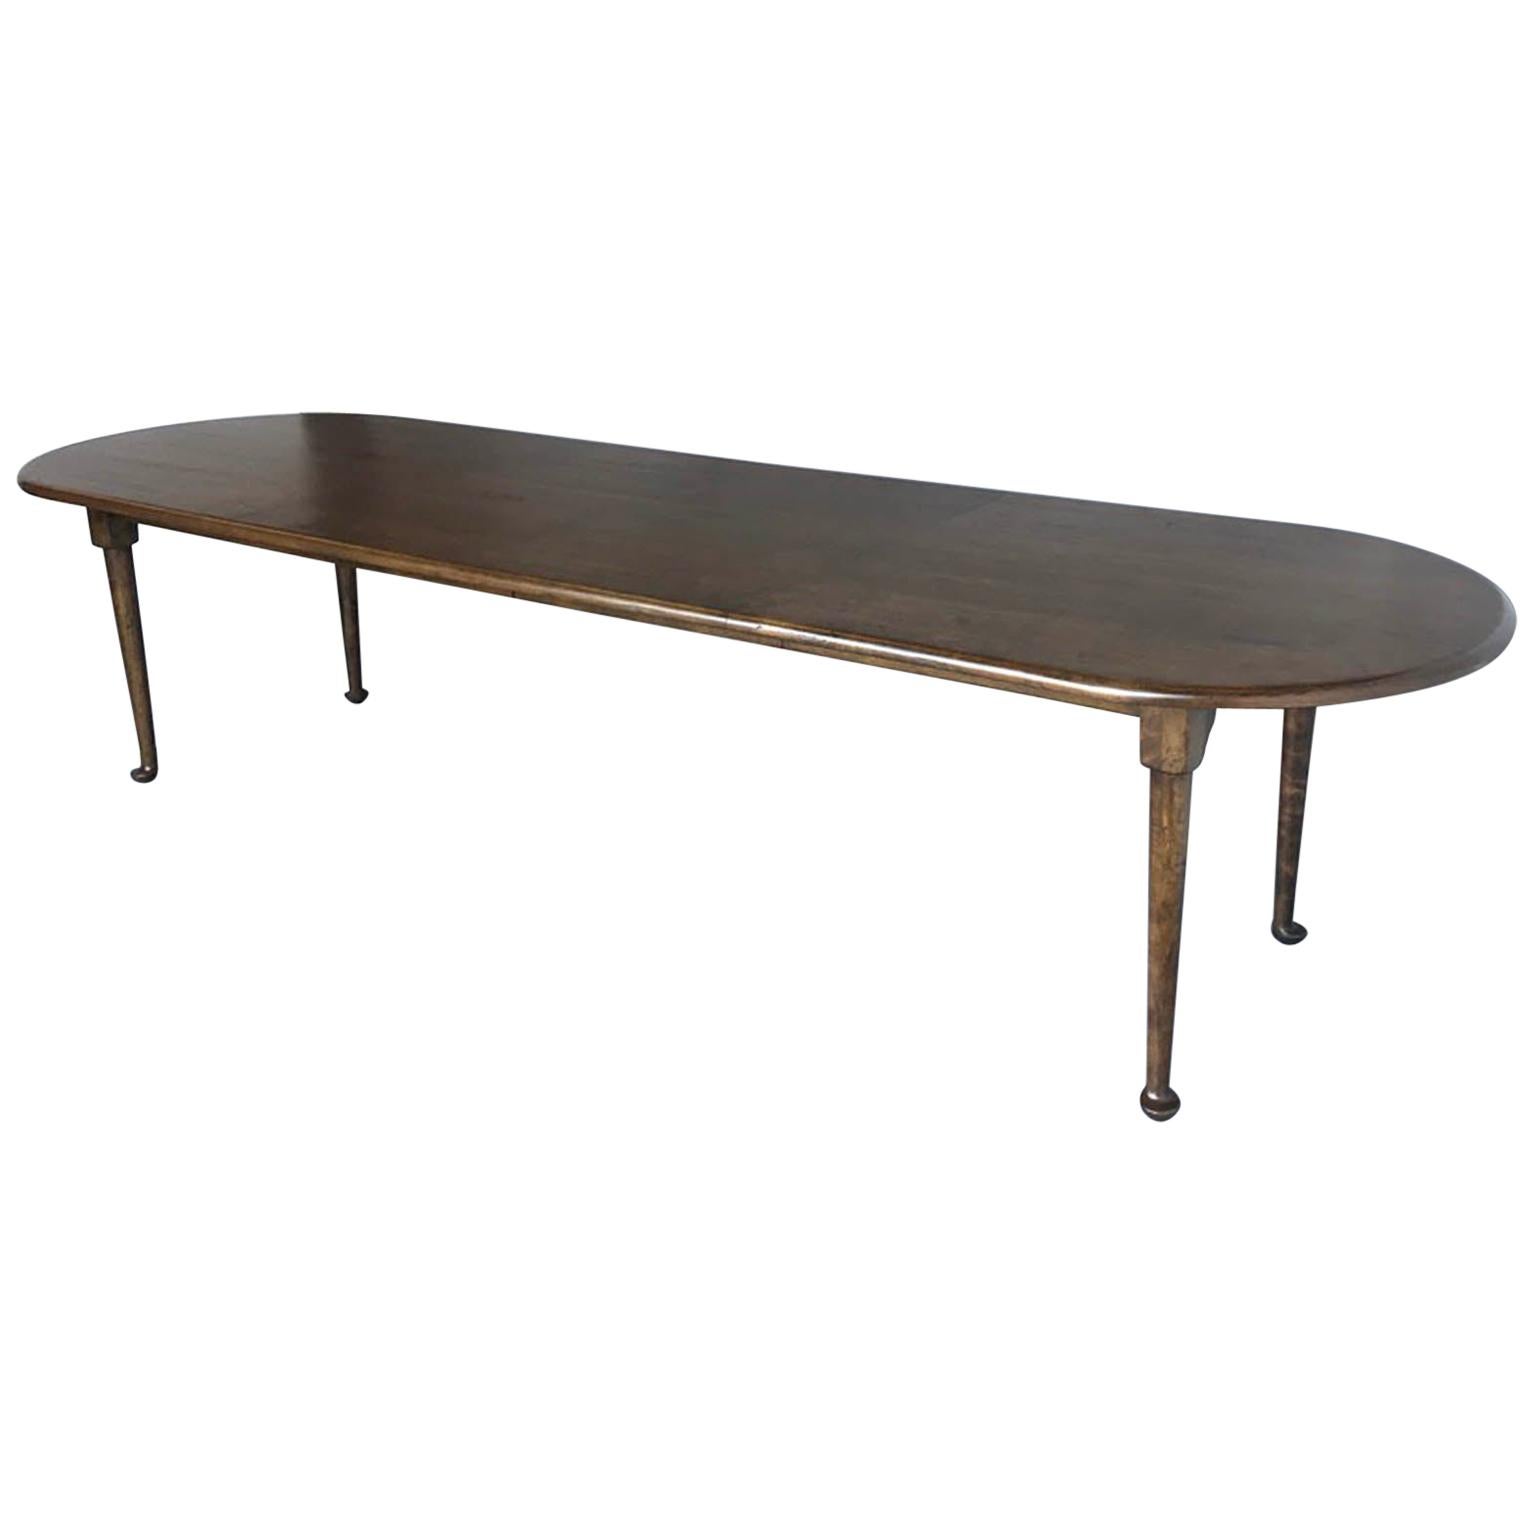 Dos Gallos Studio Custom Walnut Wood Queen Anne Table with Extension Leaves For Sale